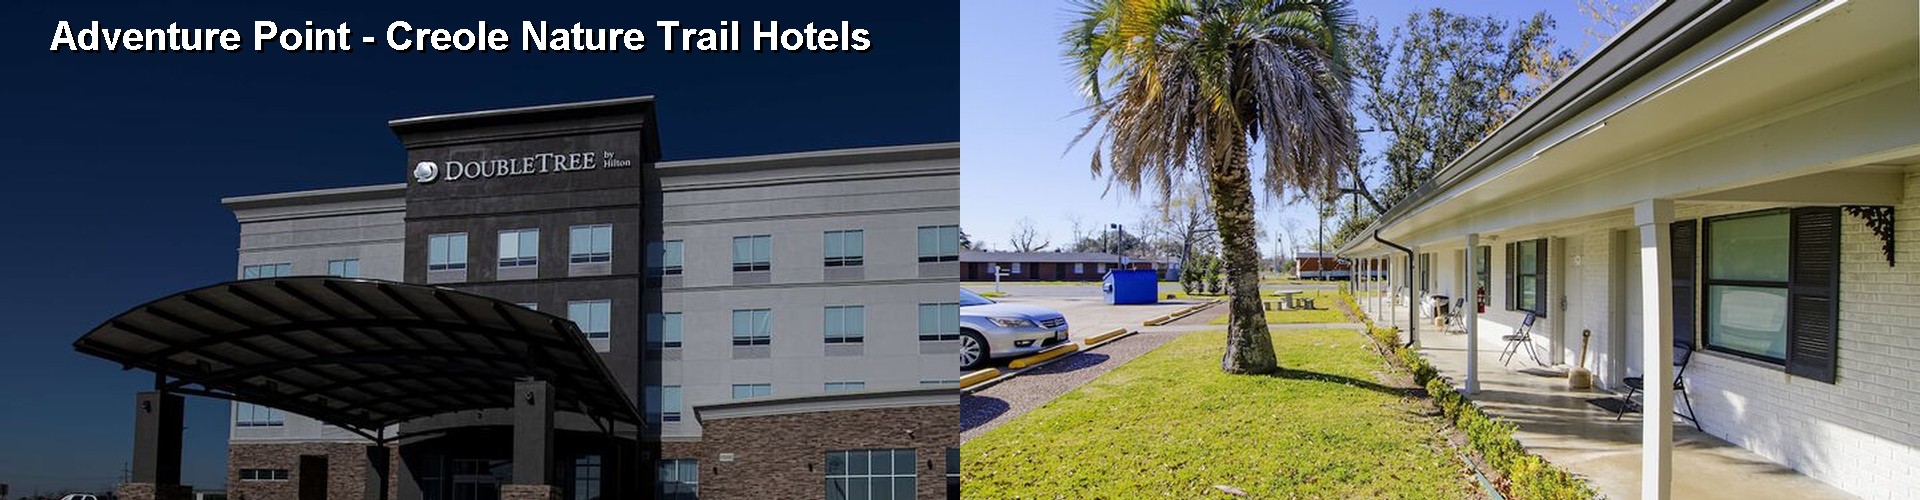 4 Best Hotels near Adventure Point - Creole Nature Trail